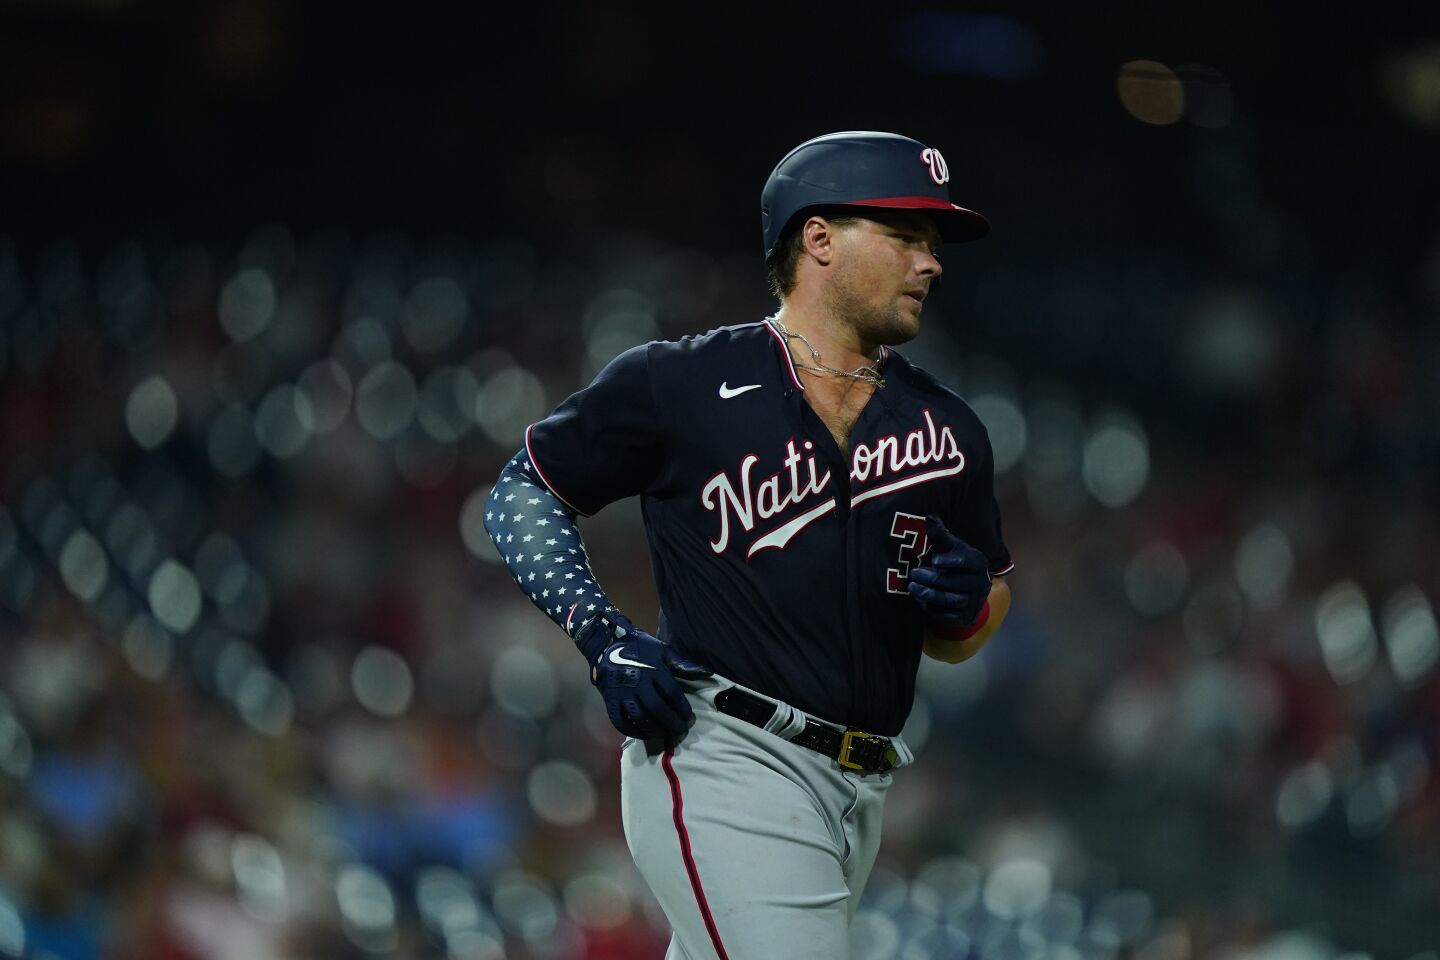 30 | Washington Nationals (36-74; LW: 30)Poor Luke Voit, who looked like he’d remain a Padre if it weren’t for Eric Hosmer vetoing his move to the Nationals in the Juan Soto trade.